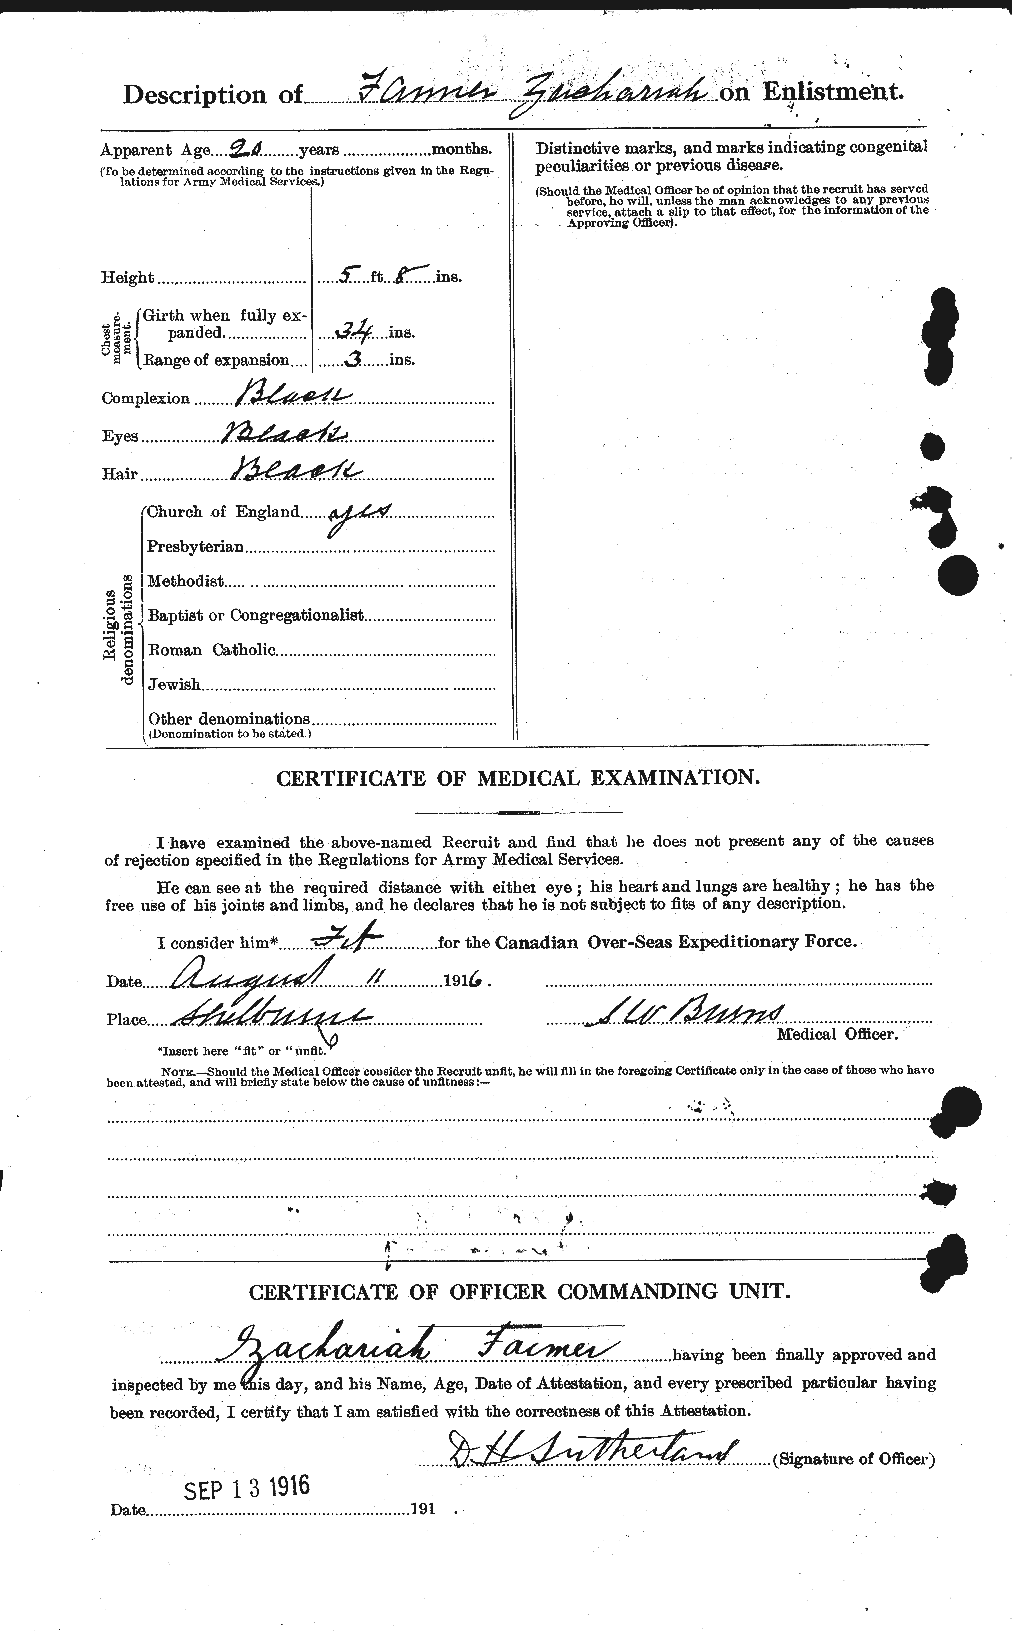 Personnel Records of the First World War - CEF 318438b